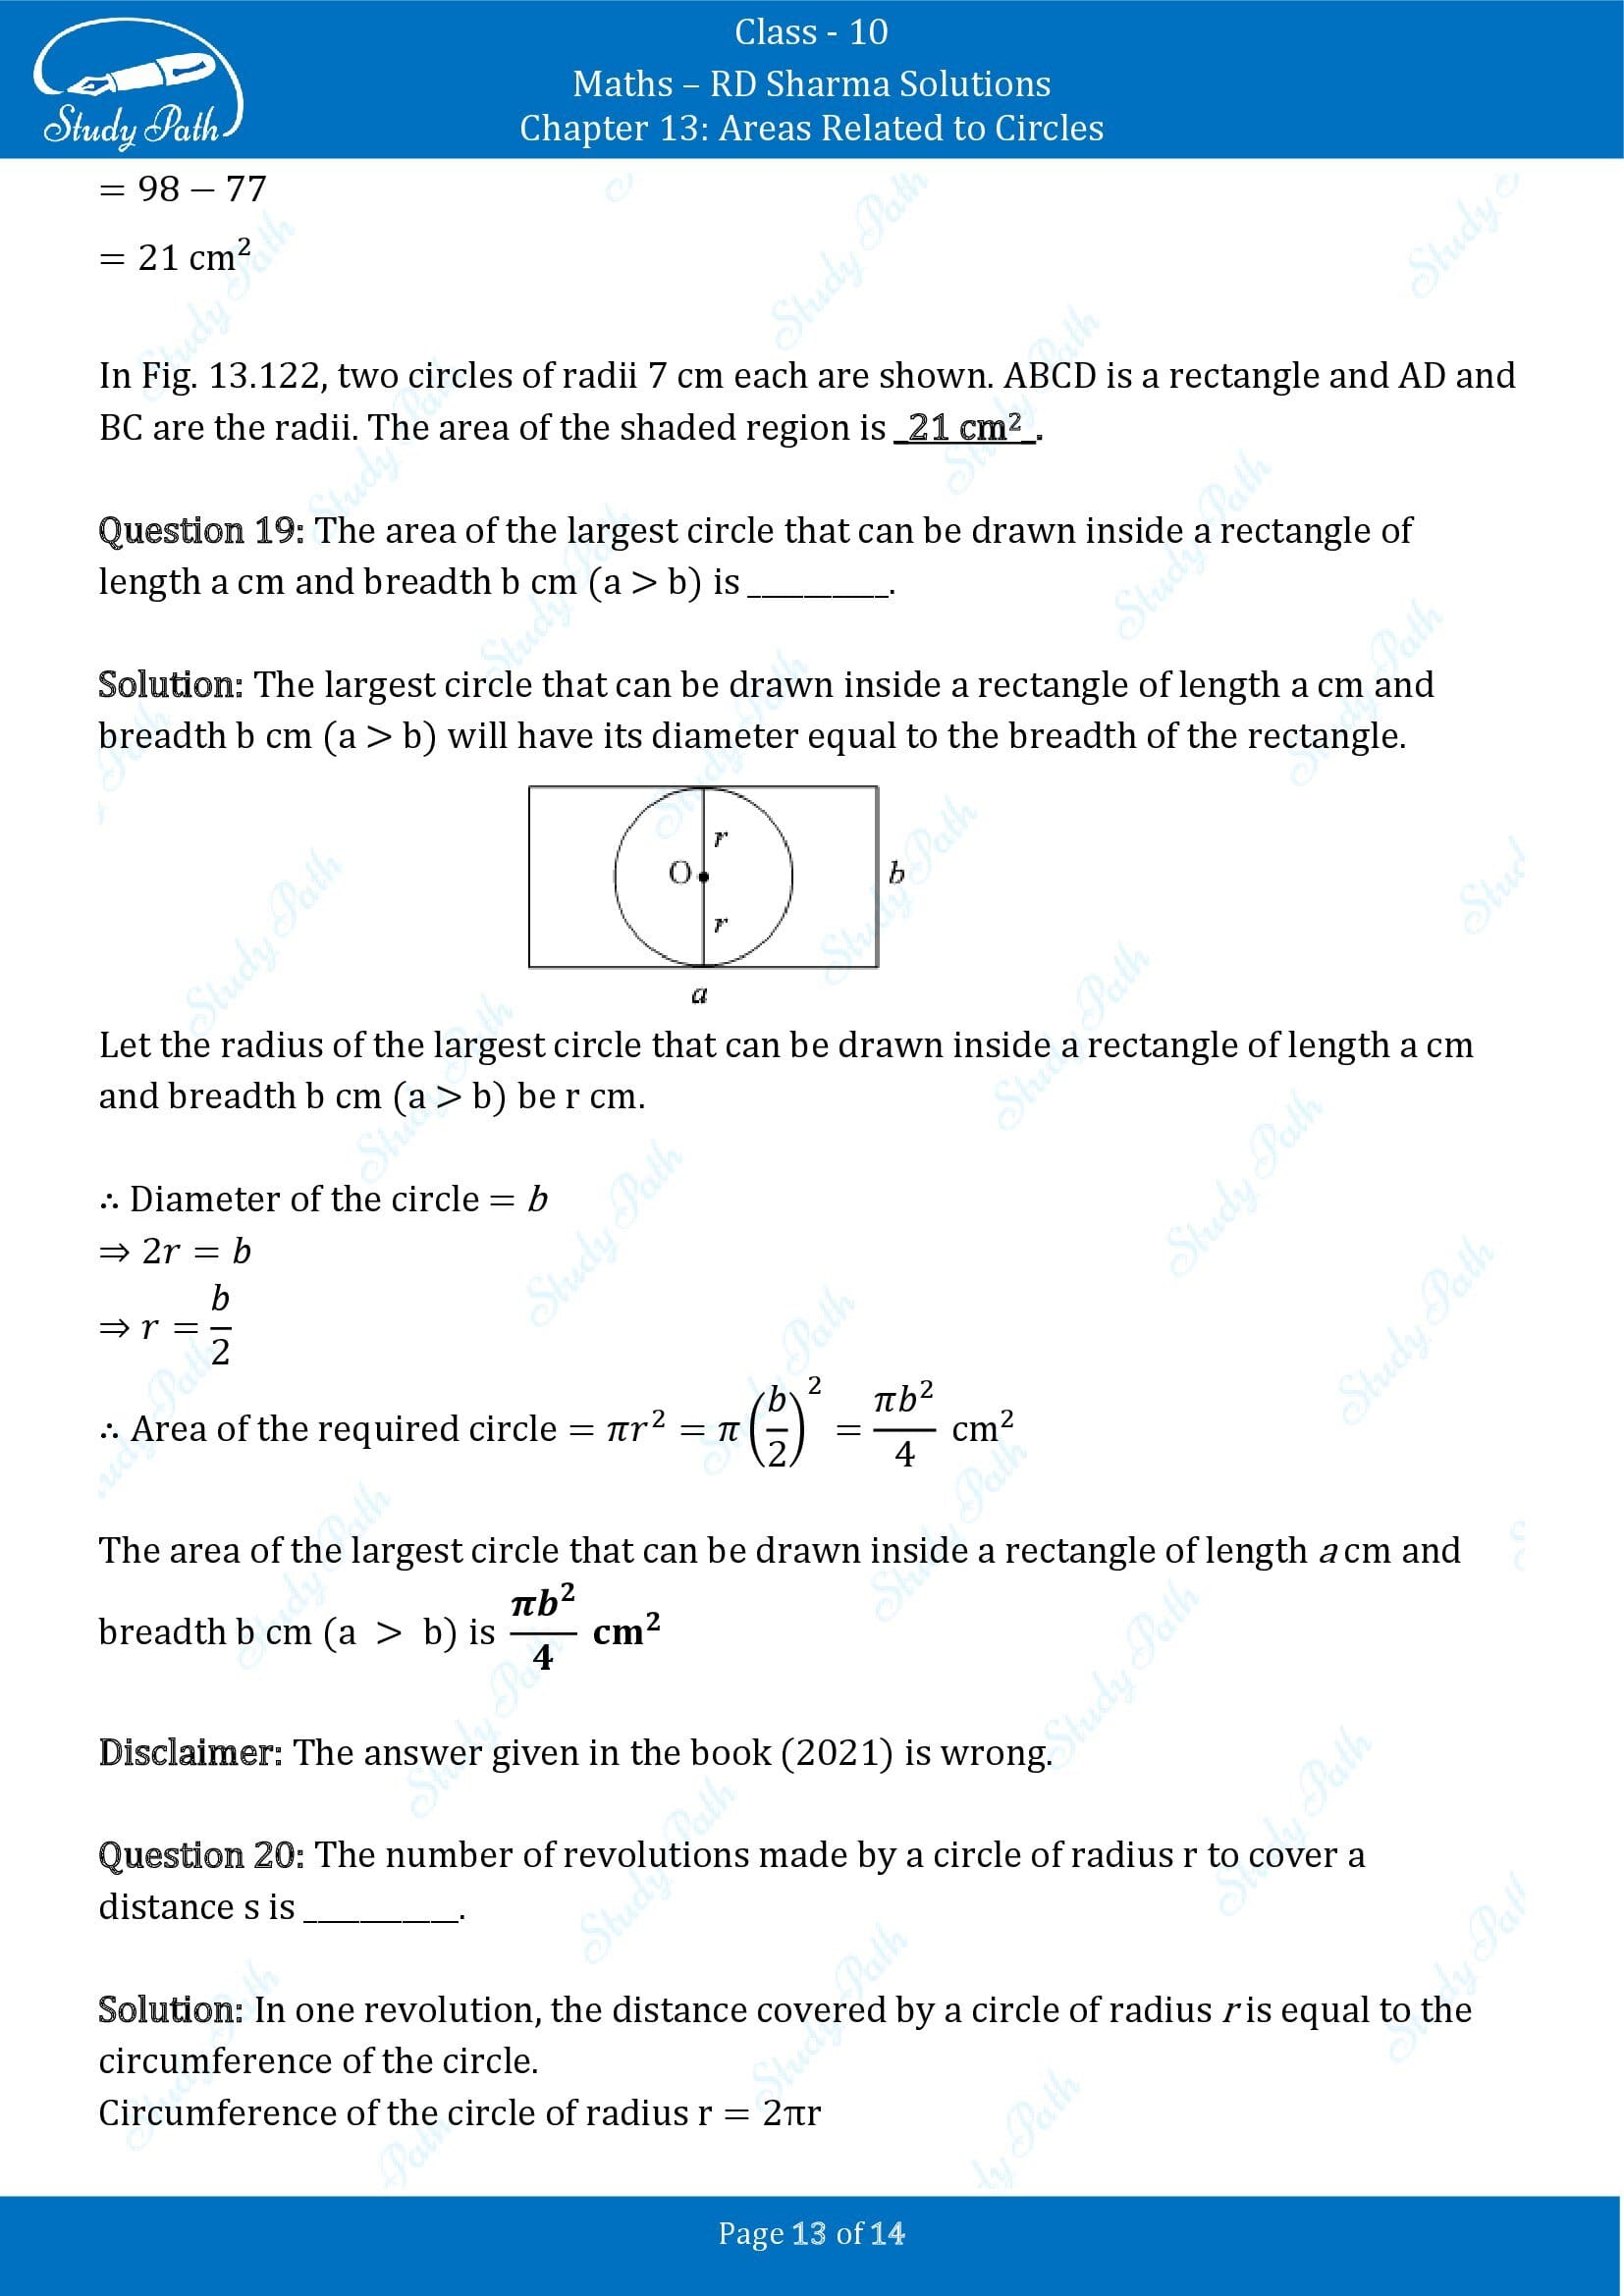 RD Sharma Solutions Class 10 Chapter 13 Areas Related to Circles Fill in the Blank Type Questions FBQs 00013